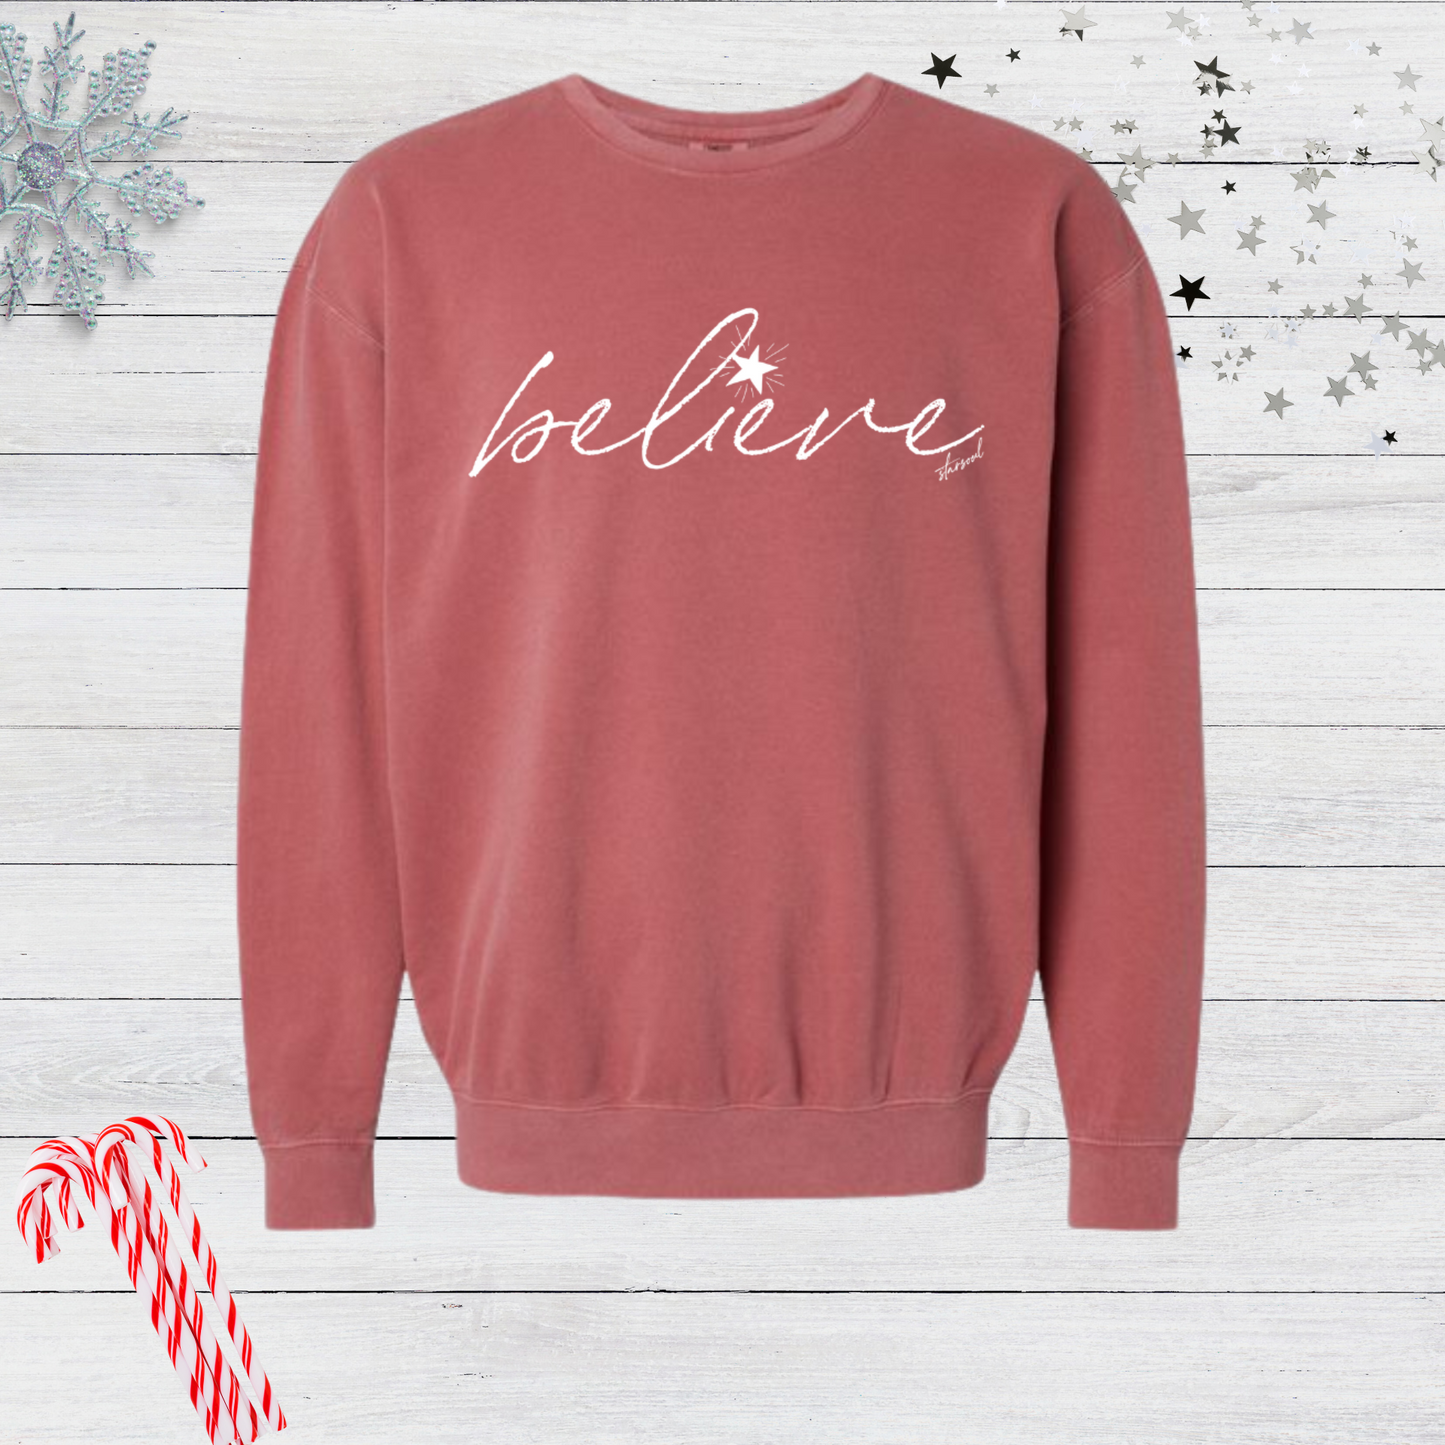 crimson vintage wash sweatshirt with red imprint "believe" on the front in cursive